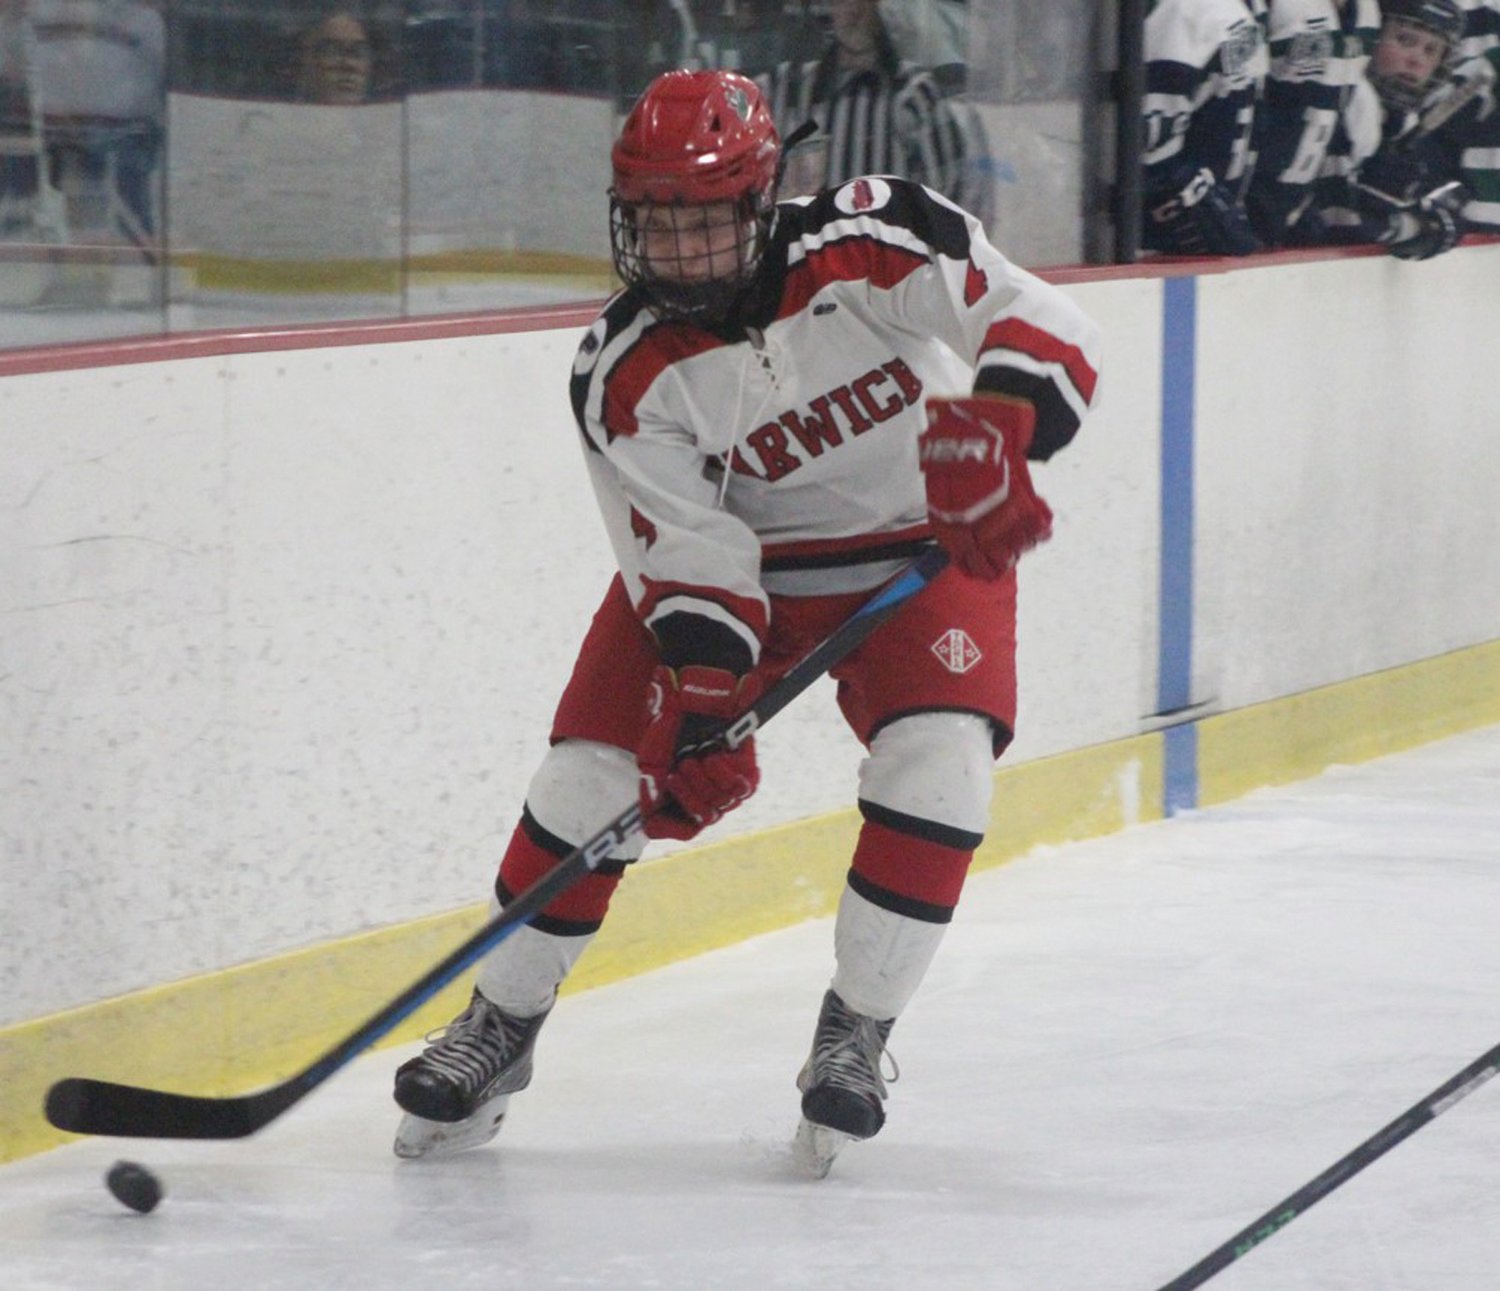 ALONG THE BOARDS: Mia Campbell works the puck up the ice.